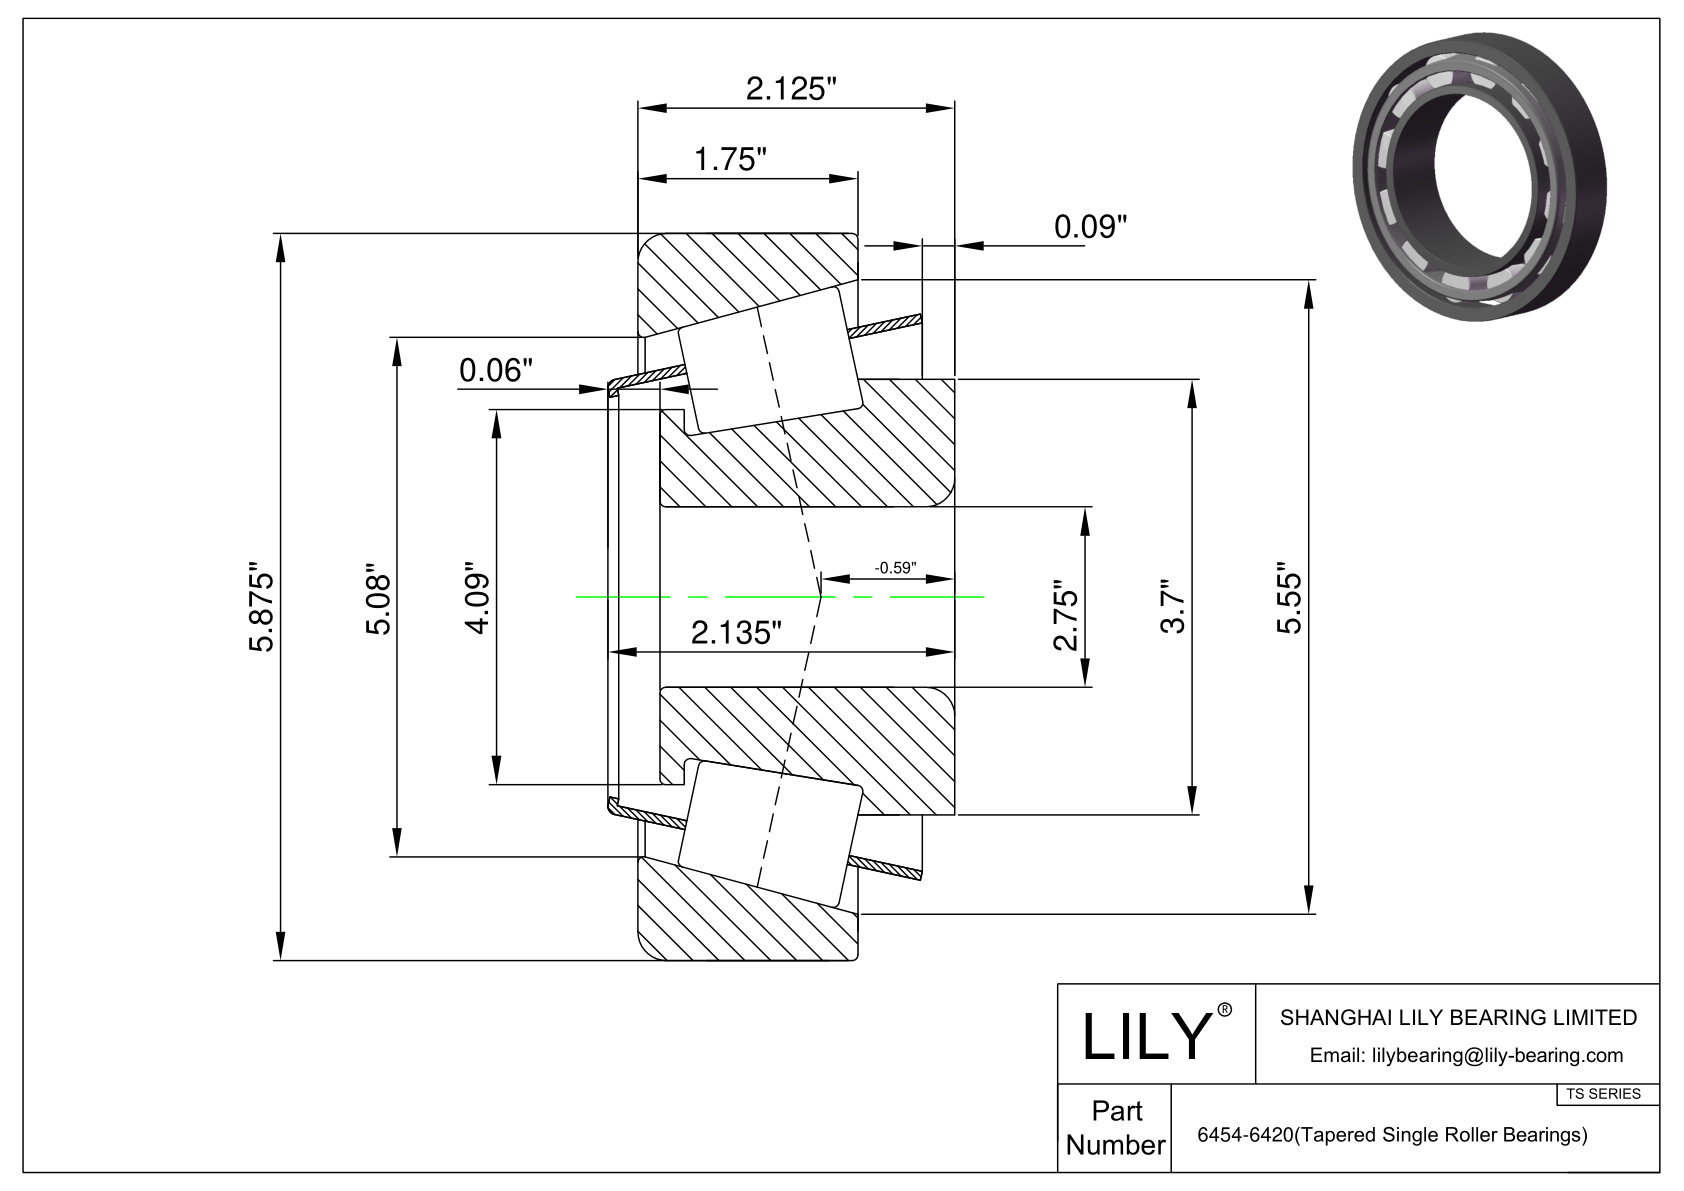 6454-6420 TS (Tapered Single Roller Bearings) (Imperial) cad drawing